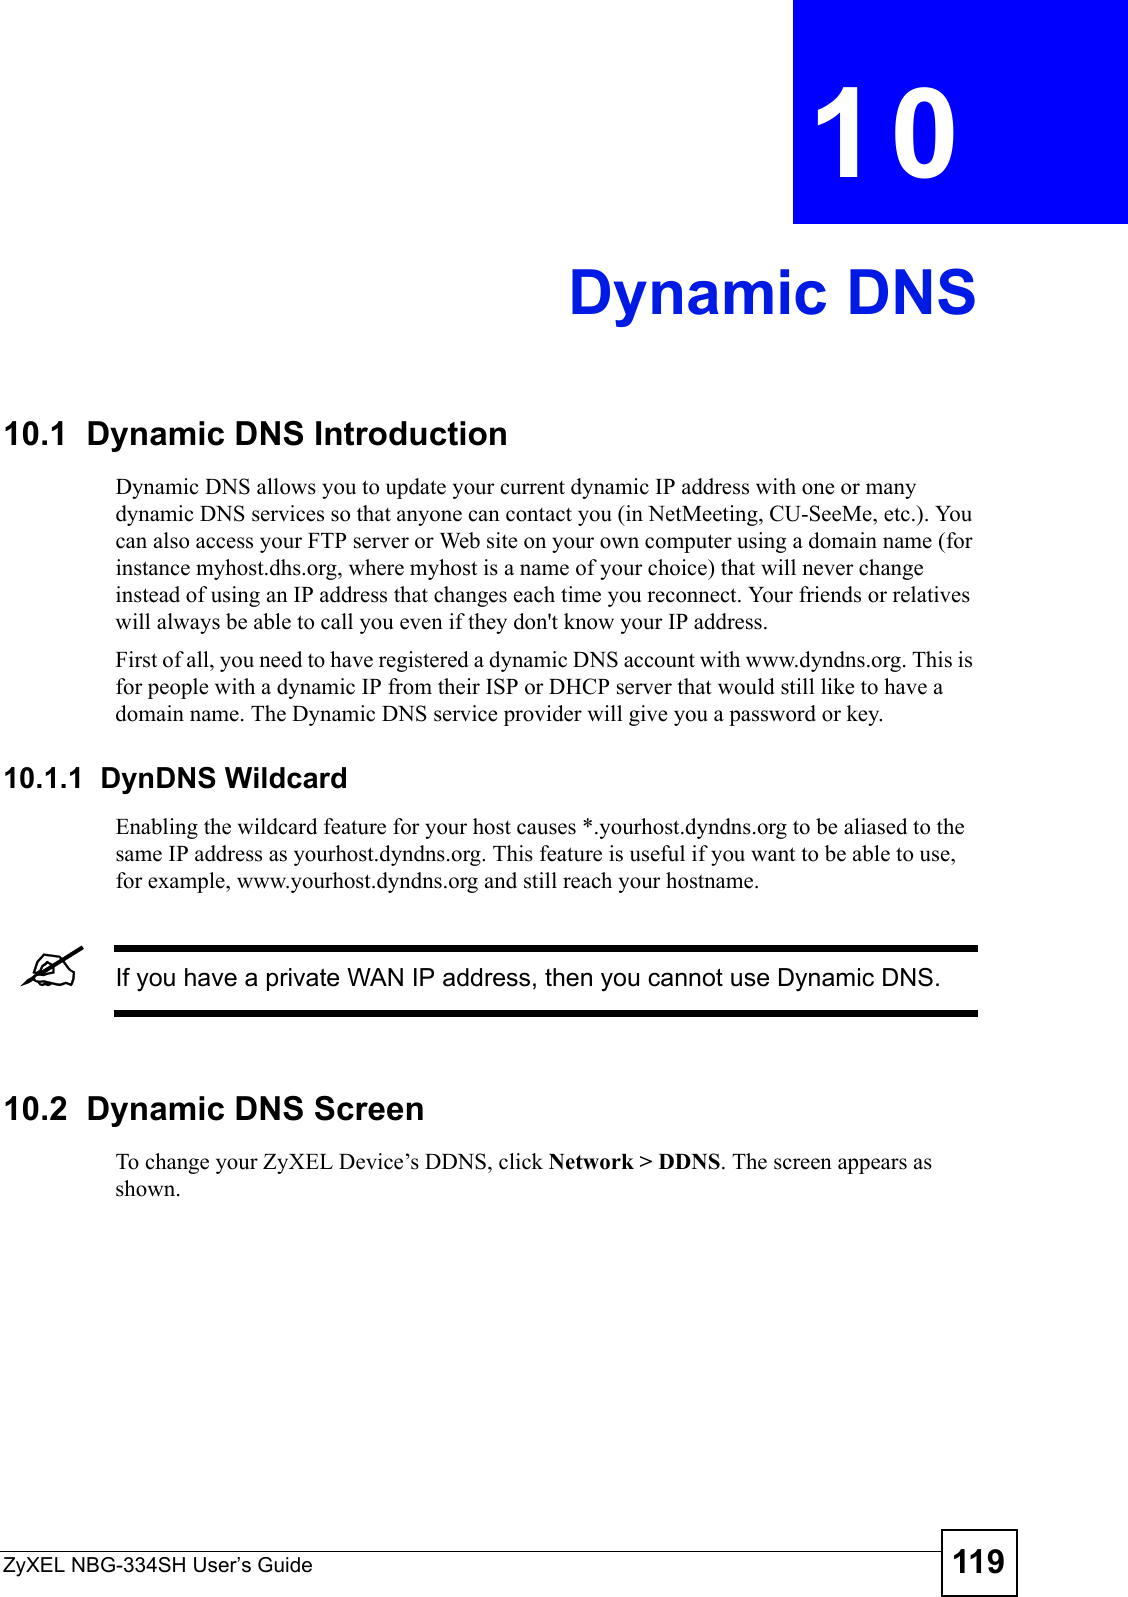 ZyXEL NBG-334SH User’s Guide 119CHAPTER  10 Dynamic DNS10.1  Dynamic DNS Introduction Dynamic DNS allows you to update your current dynamic IP address with one or many dynamic DNS services so that anyone can contact you (in NetMeeting, CU-SeeMe, etc.). You can also access your FTP server or Web site on your own computer using a domain name (for instance myhost.dhs.org, where myhost is a name of your choice) that will never change instead of using an IP address that changes each time you reconnect. Your friends or relatives will always be able to call you even if they don&apos;t know your IP address.First of all, you need to have registered a dynamic DNS account with www.dyndns.org. This is for people with a dynamic IP from their ISP or DHCP server that would still like to have a domain name. The Dynamic DNS service provider will give you a password or key.10.1.1  DynDNS Wildcard  Enabling the wildcard feature for your host causes *.yourhost.dyndns.org to be aliased to the same IP address as yourhost.dyndns.org. This feature is useful if you want to be able to use, for example, www.yourhost.dyndns.org and still reach your hostname.&quot;If you have a private WAN IP address, then you cannot use Dynamic DNS.10.2  Dynamic DNS Screen   To change your ZyXEL Device’s DDNS, click Network &gt; DDNS. The screen appears as shown.